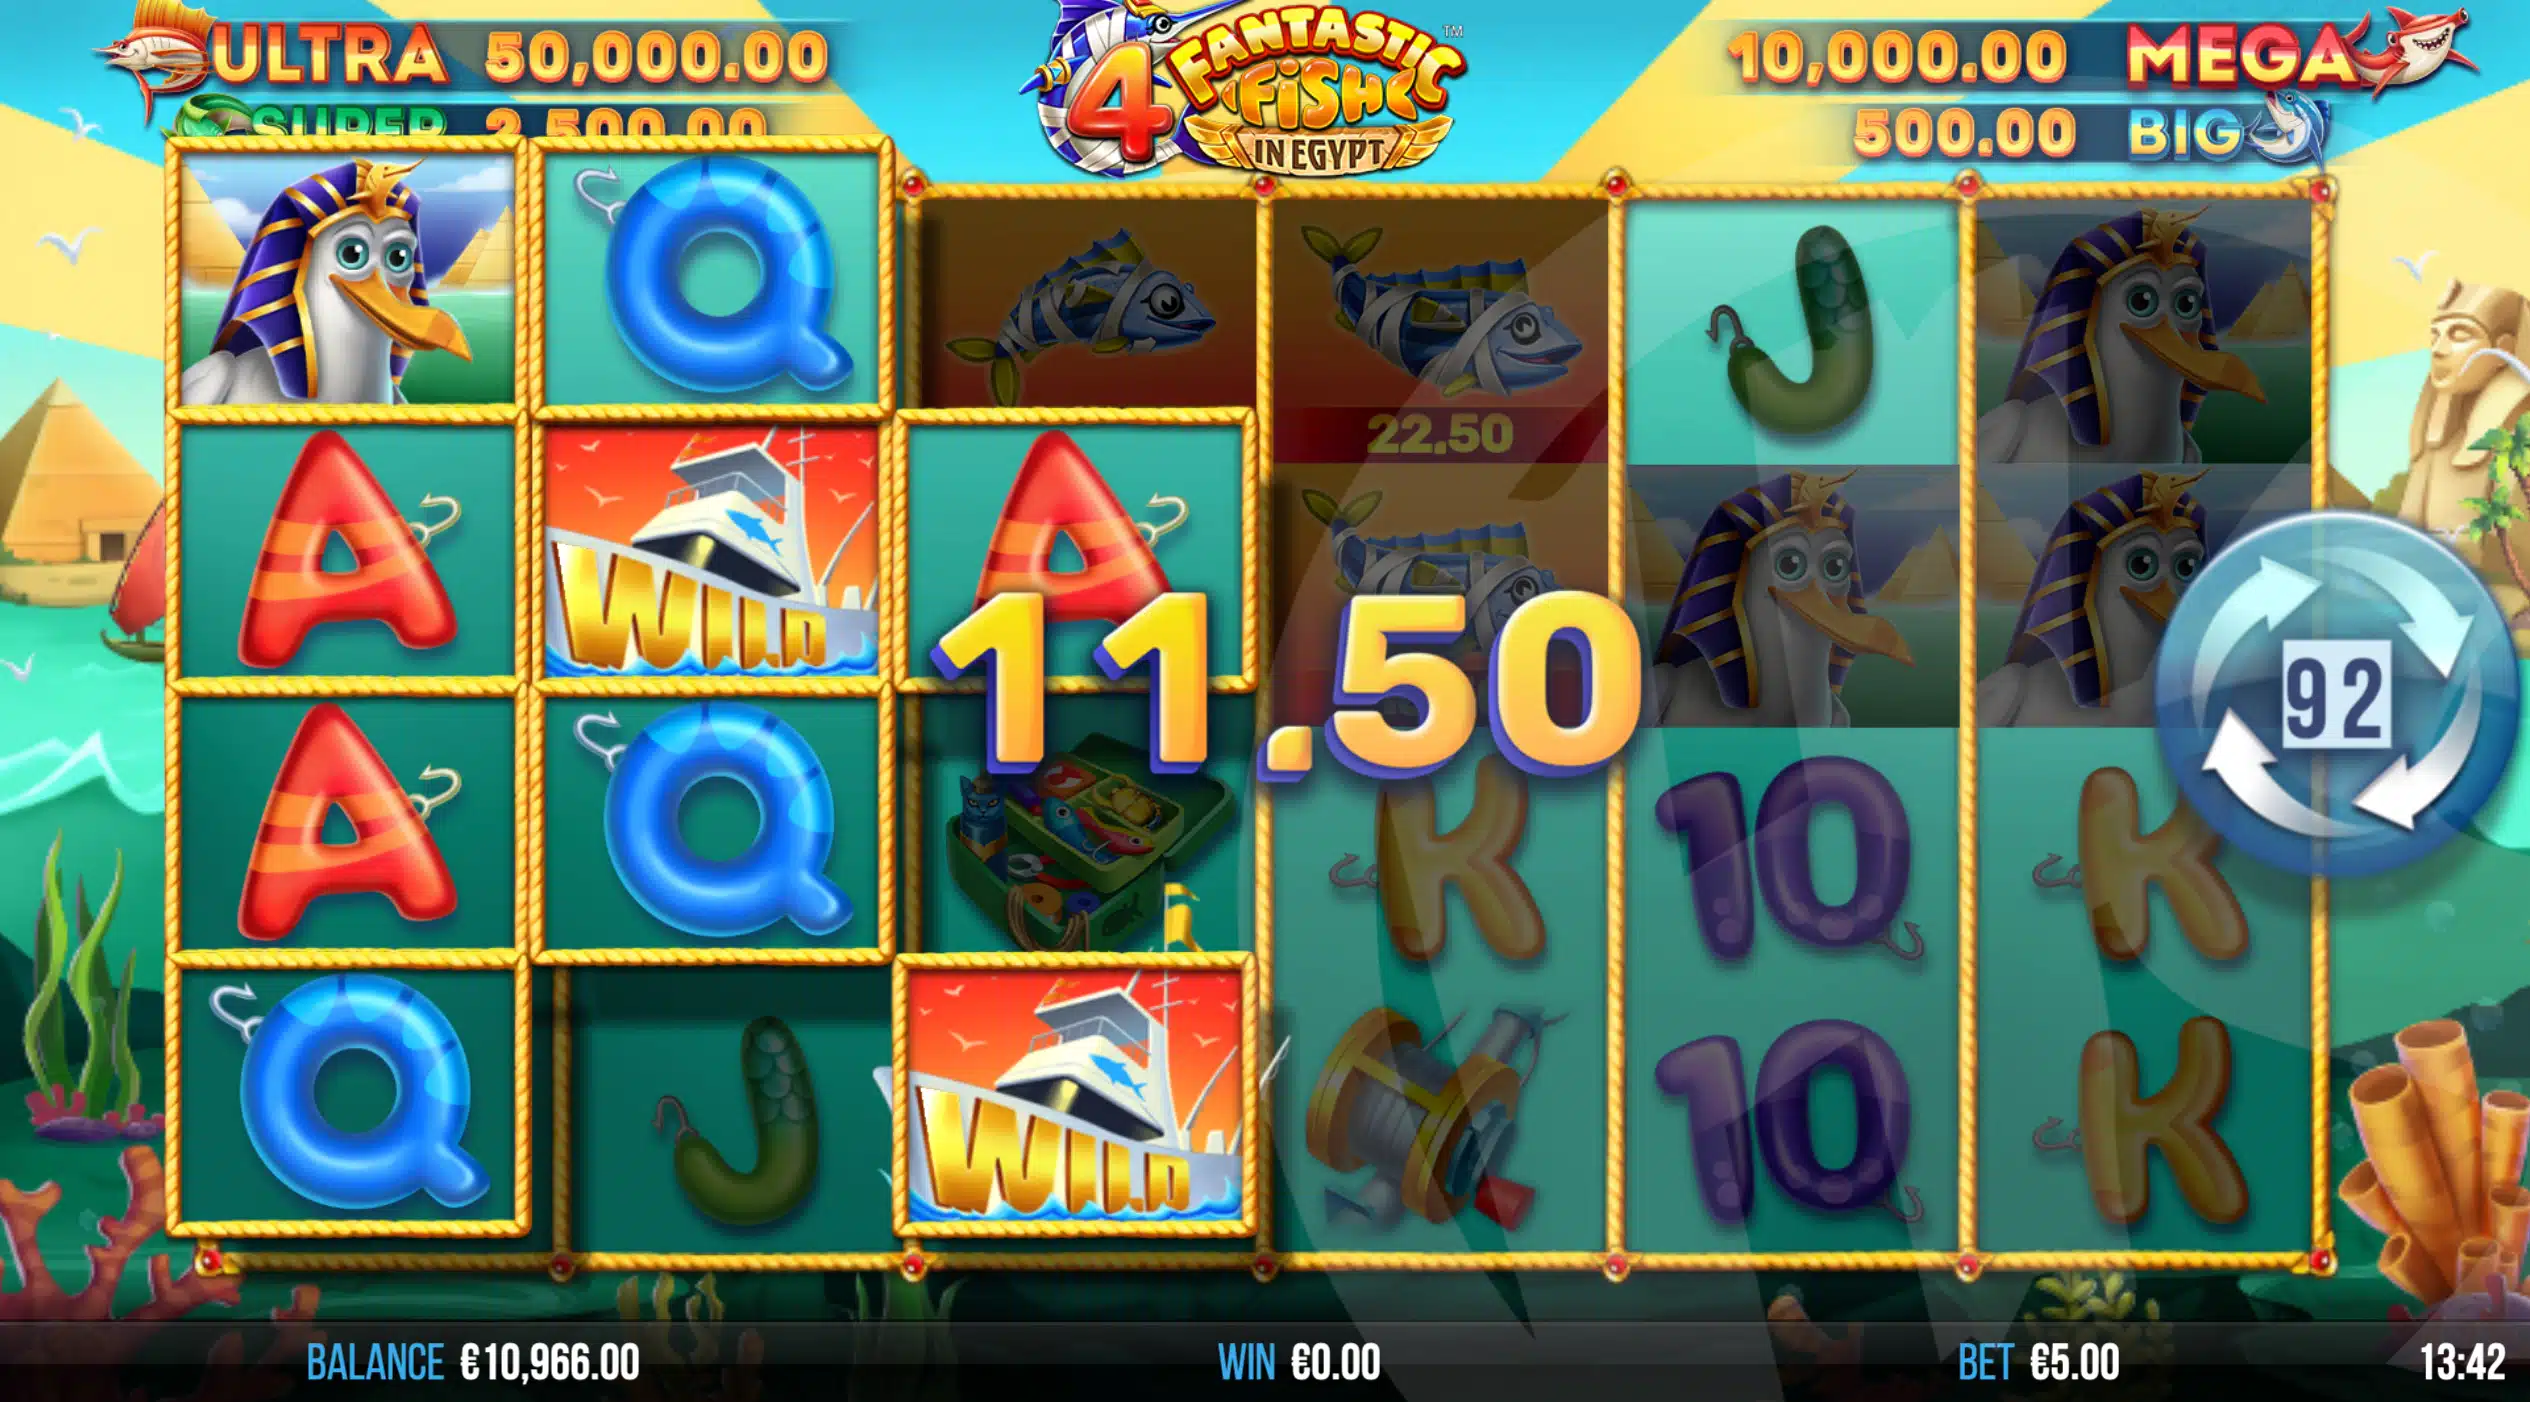 4 Fantastic Fish in Egypt Offers Players 4,096 Ways to Win